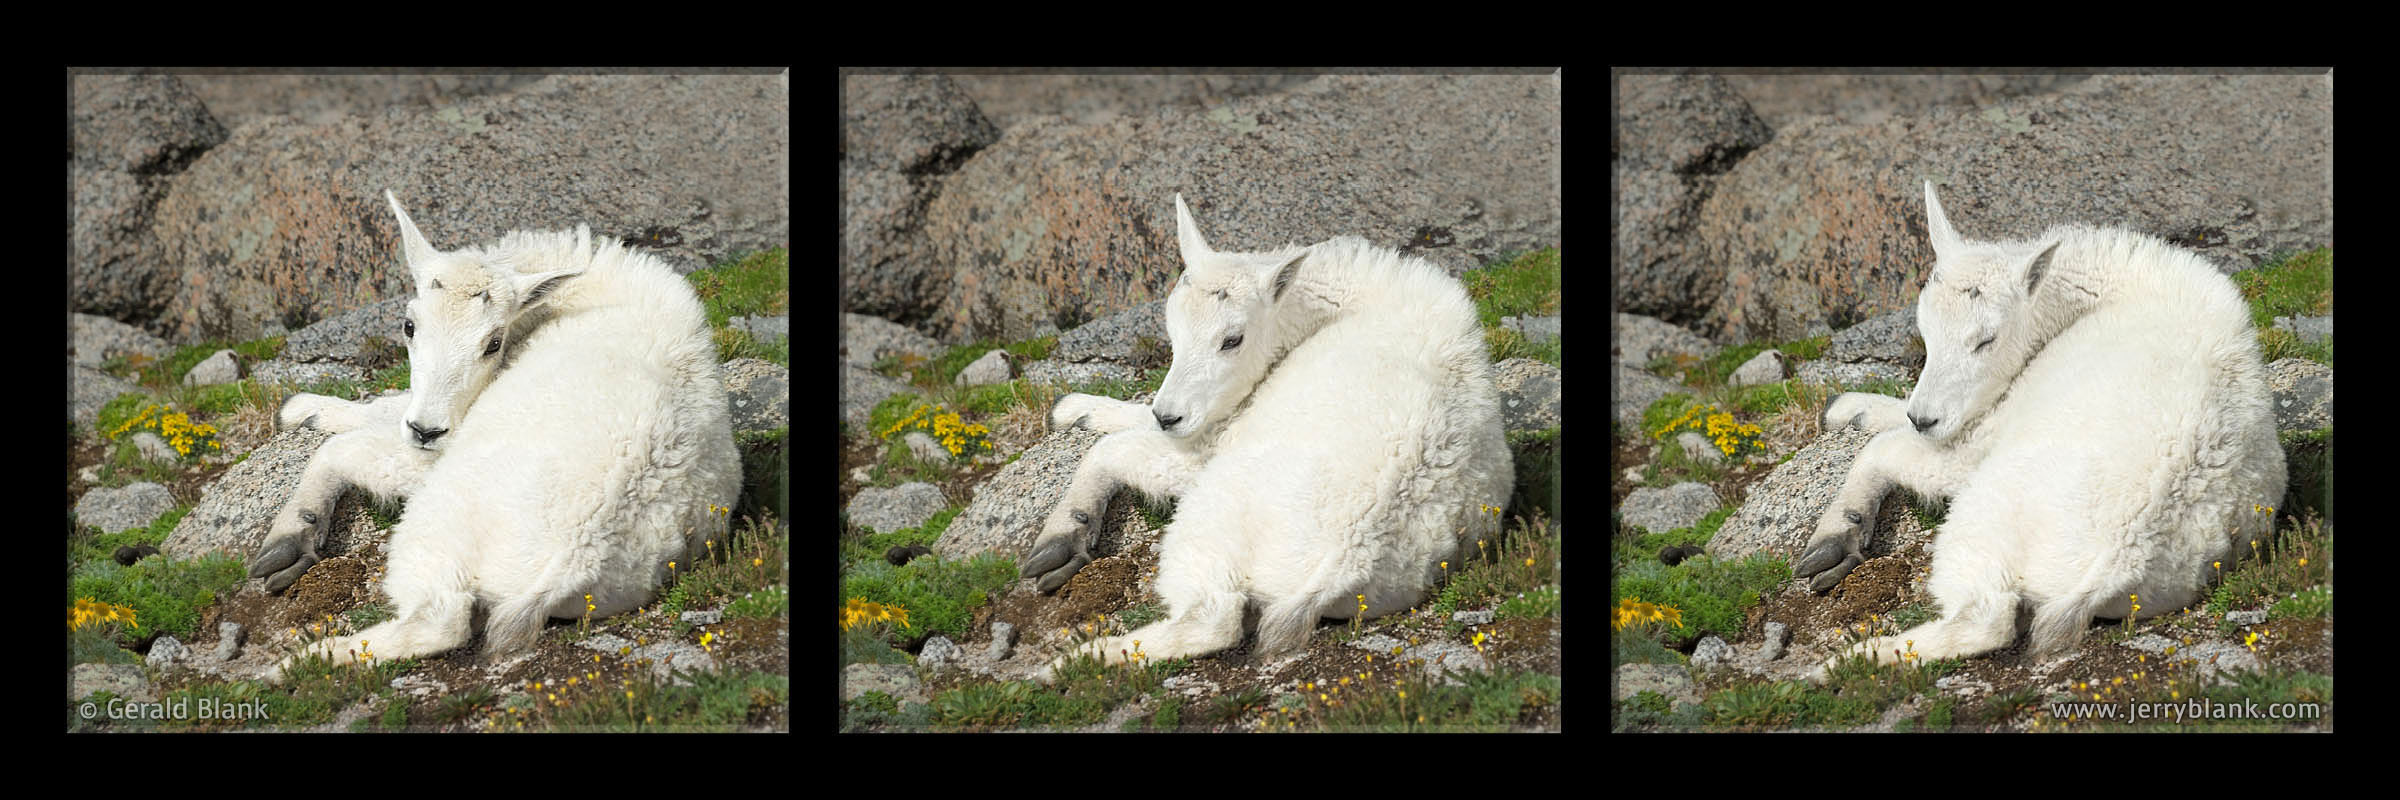 #20555p - A mountain goat kid rests in the sun on Mount Evans, Colorado - photo by Jerry Blank